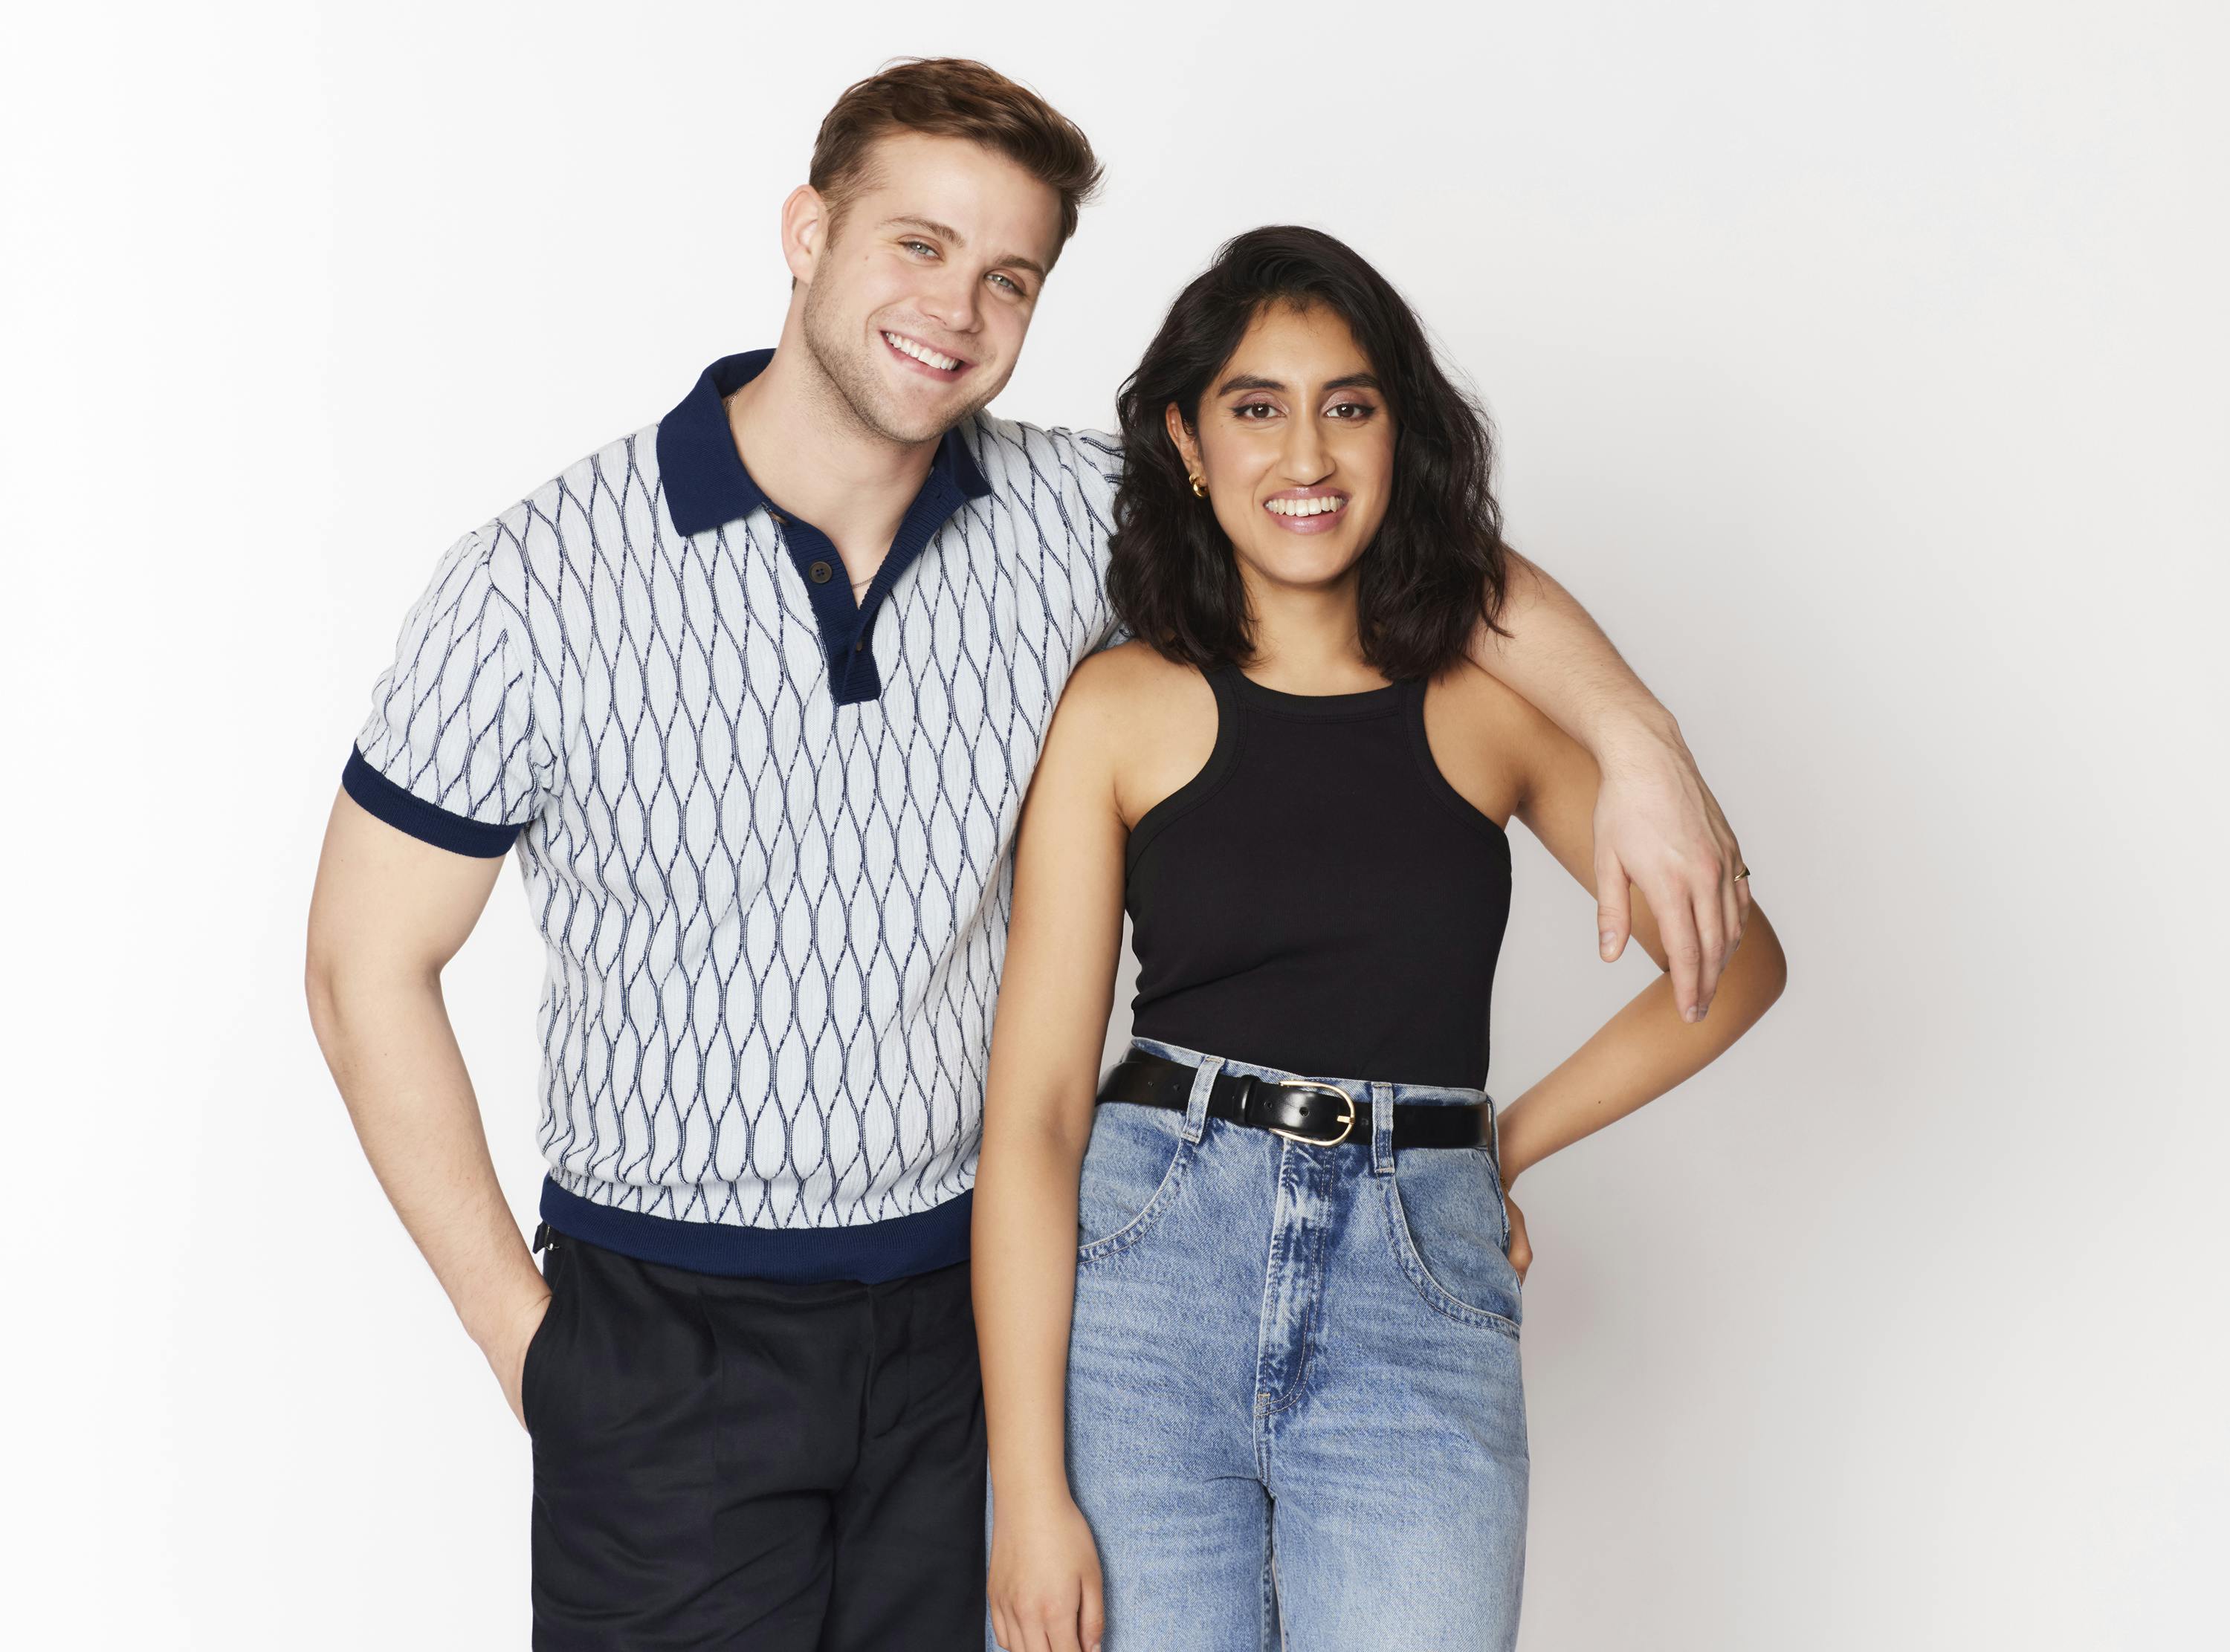 Leo Woodall and Ambika Mod pose together against a white background. He wears a patterned polo shirt and dark pants. She wears jeans and a black racerback tank.